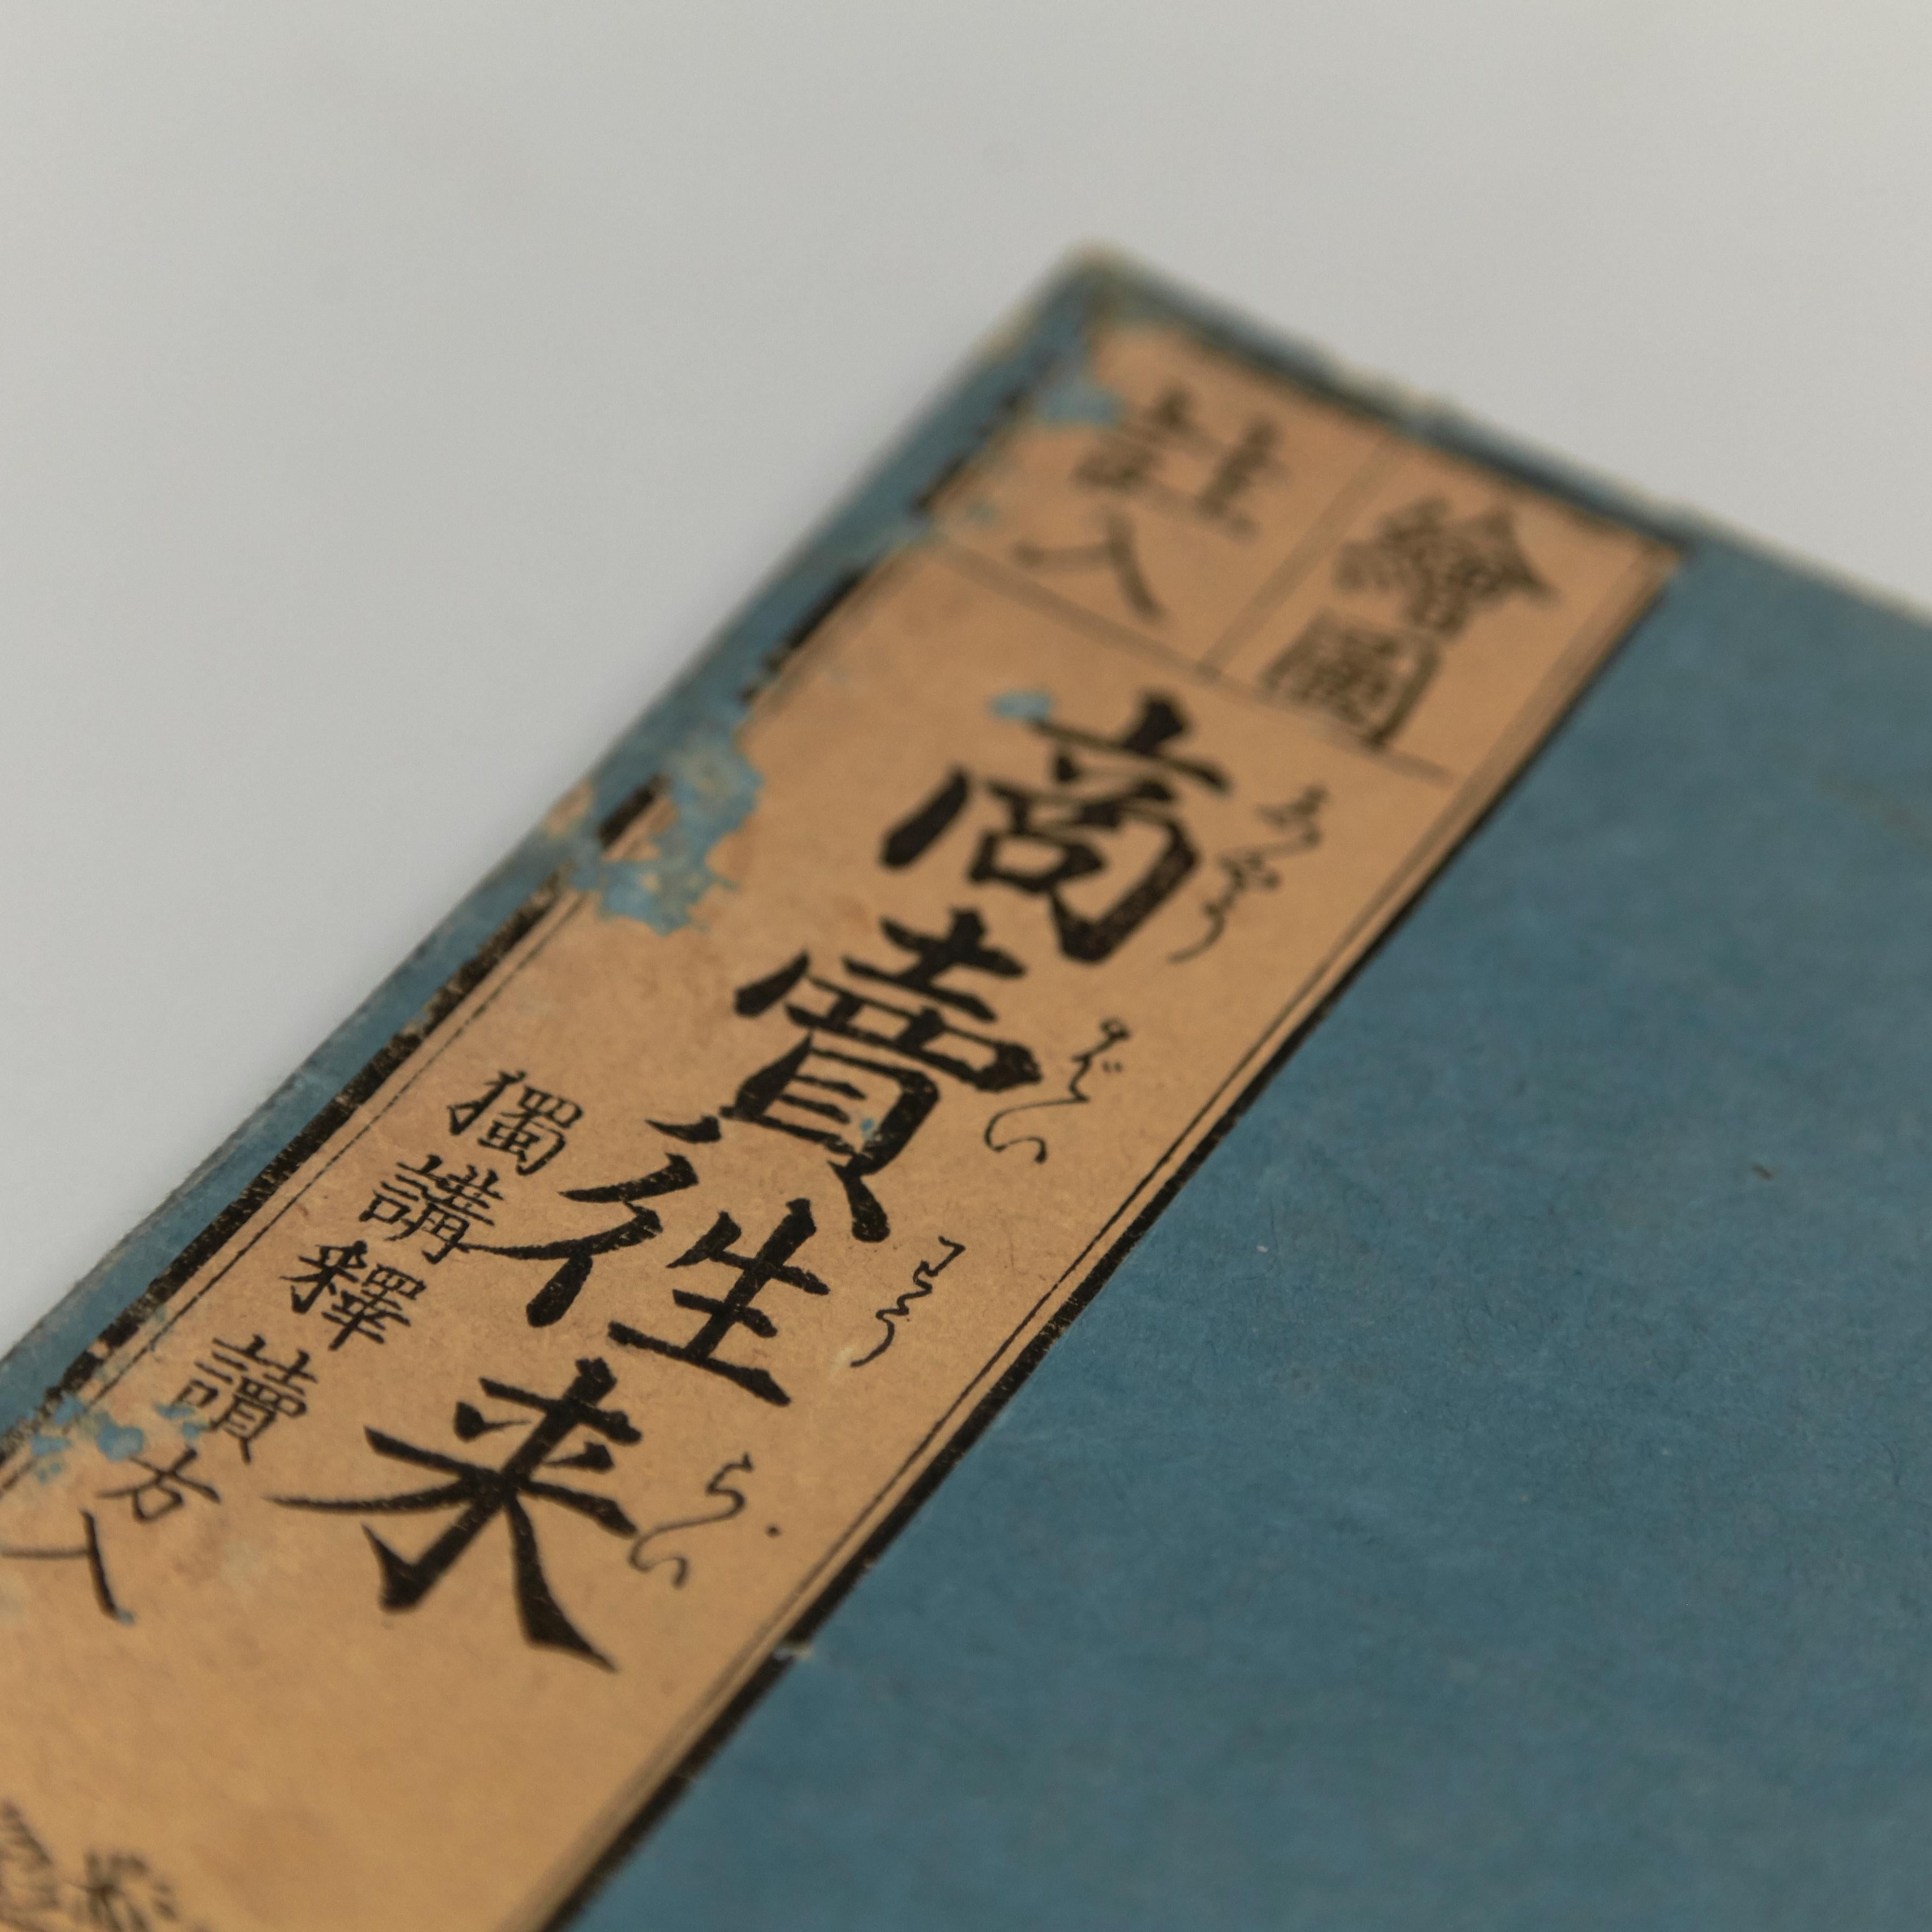 Antique Japanese Oraimono book Edo period, circa 1840
Woodblack print book

Primary textbooks that explain buisness knowledge

Book dimensions 225 mm x 159 mm

There are damages because it is antique item as we show on the photos.

 